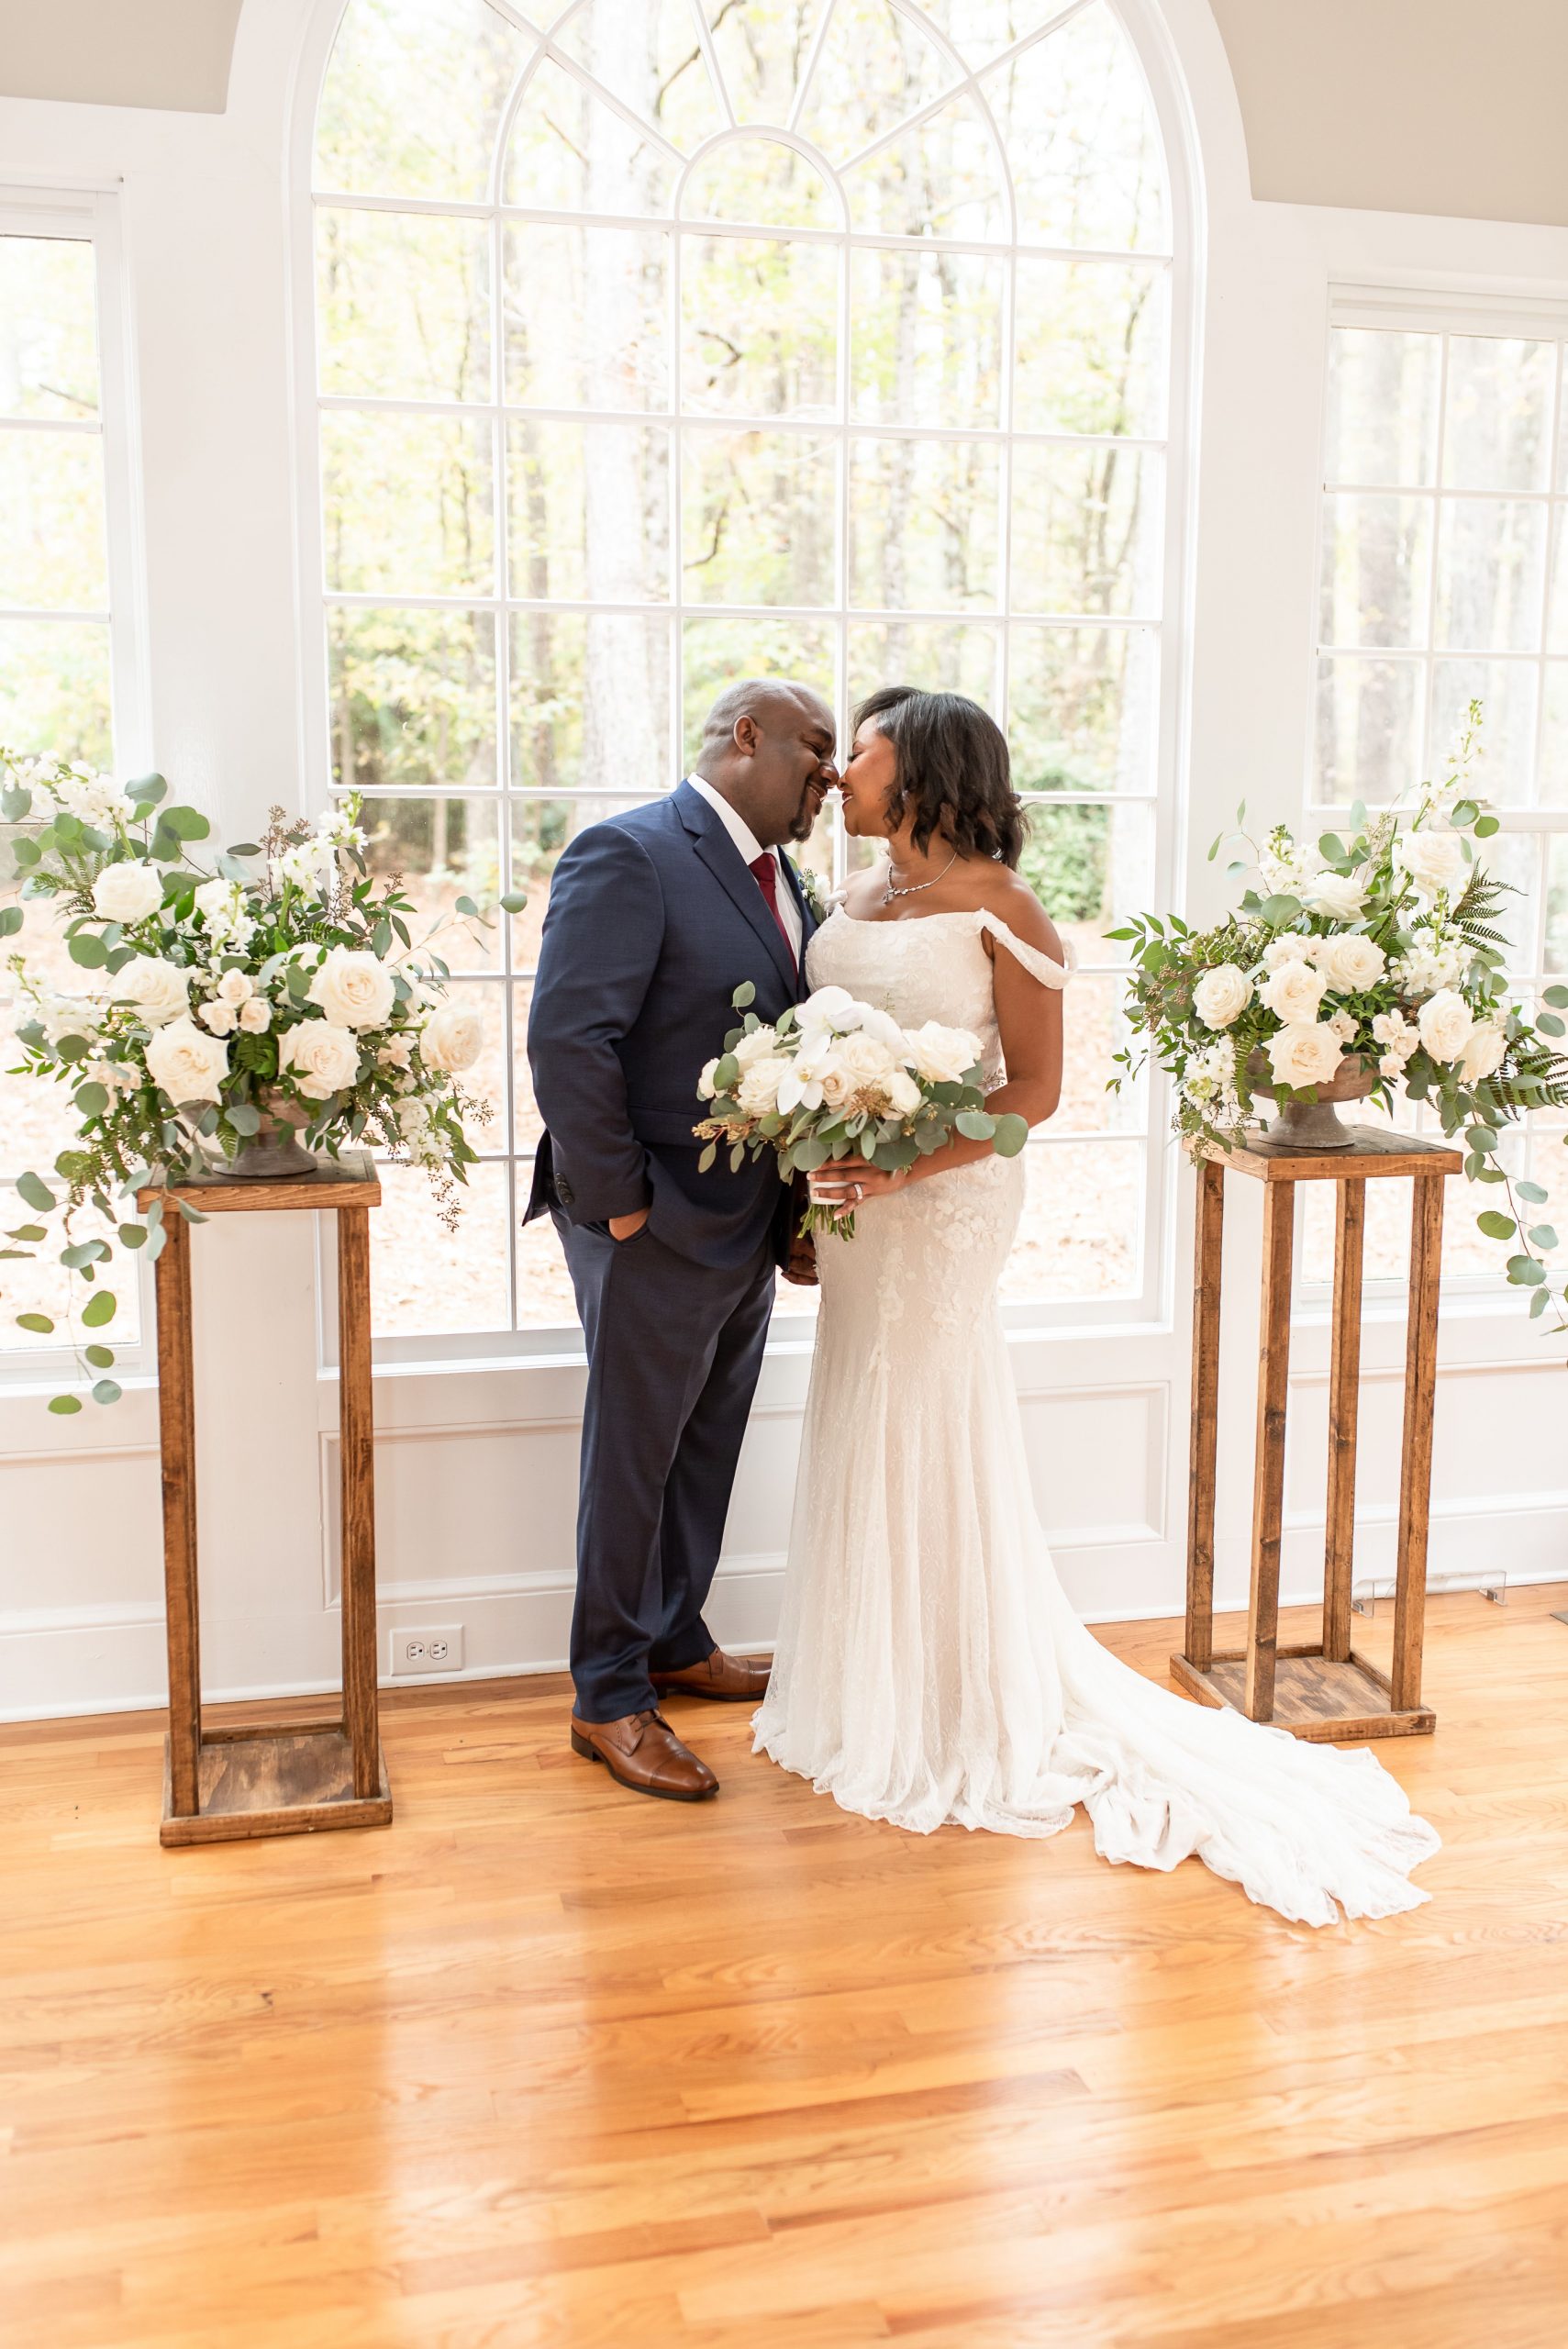 Stems Atlanta Wedding Florist, Atlanta Wedding Planner, www.stemsatlanta.com, Classic White Roses with accents of flowing greenery to highlight this beautiful couple at their surprise wedding.